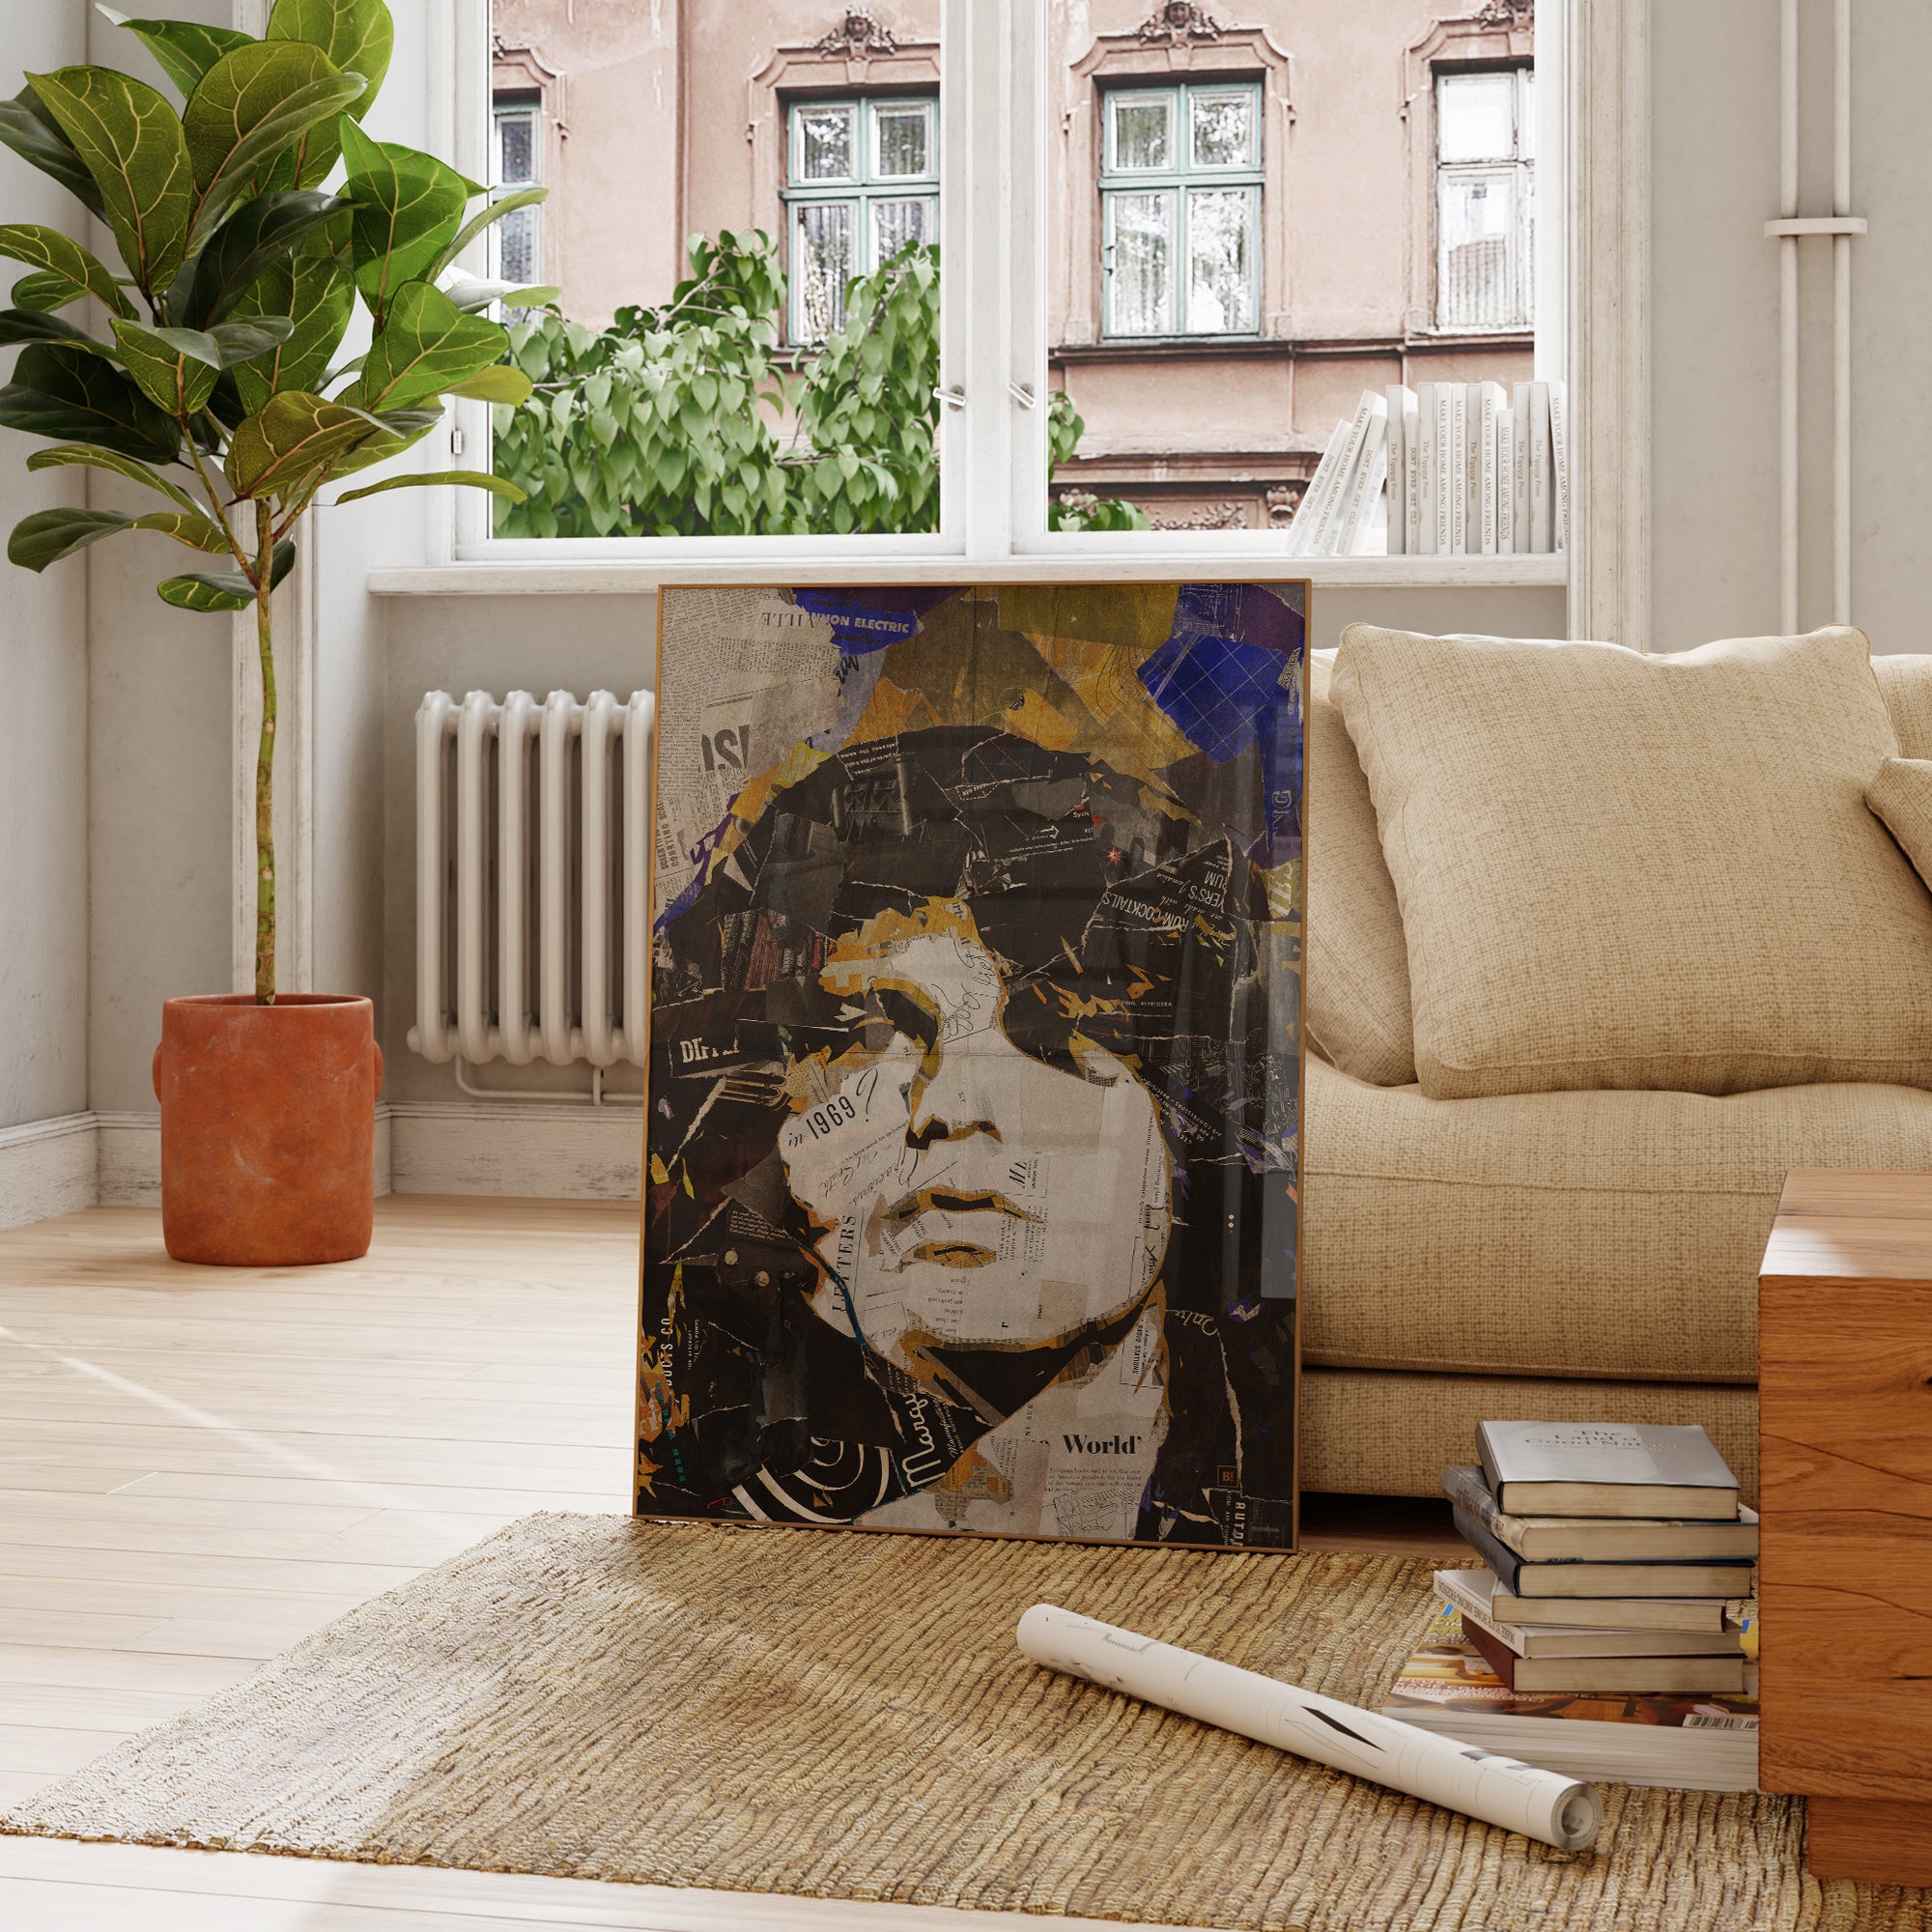 Be inspired by our iconic collage portrait art print of Jim Morrison. This artwork was printed using the giclée process on archival acid-free paper and is presented in a French living room, capturing its timeless beauty in every detail.